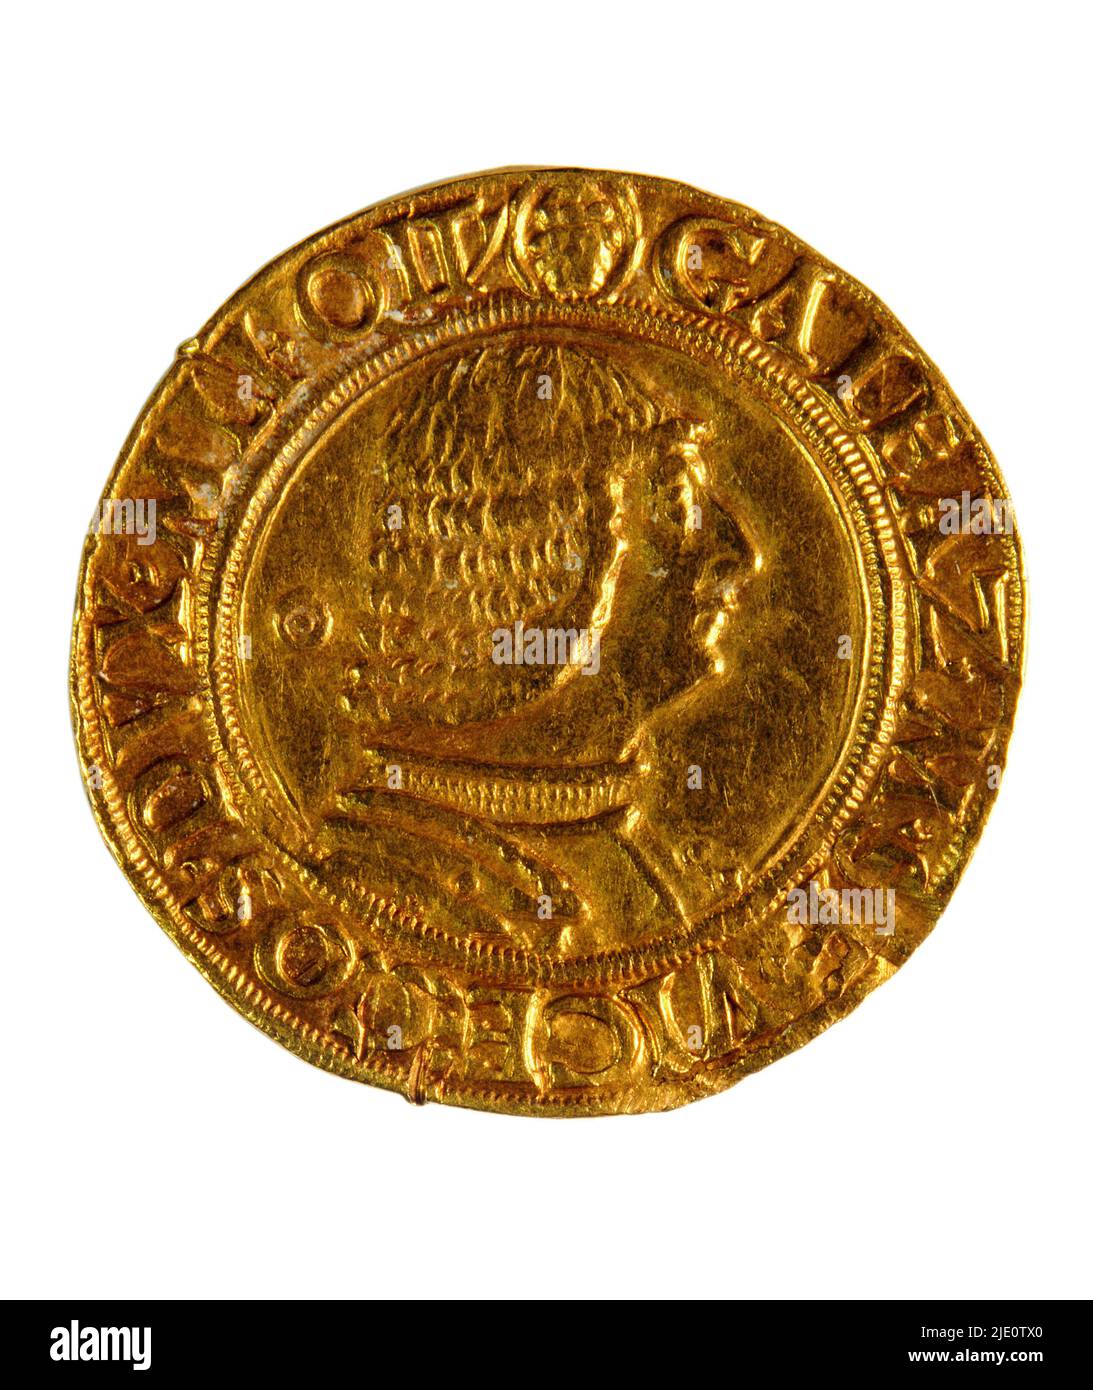 Milan, gold test of the silver Testone coined in gold by Galeazzo Maria Sforza in 1474.  BACK Ducal coat of arms surmounted by a crowned helmet, with a crest and a winged dragon eating a man; on both sides two buckets hanging from two branches that sprout from the flames. Stock Photo